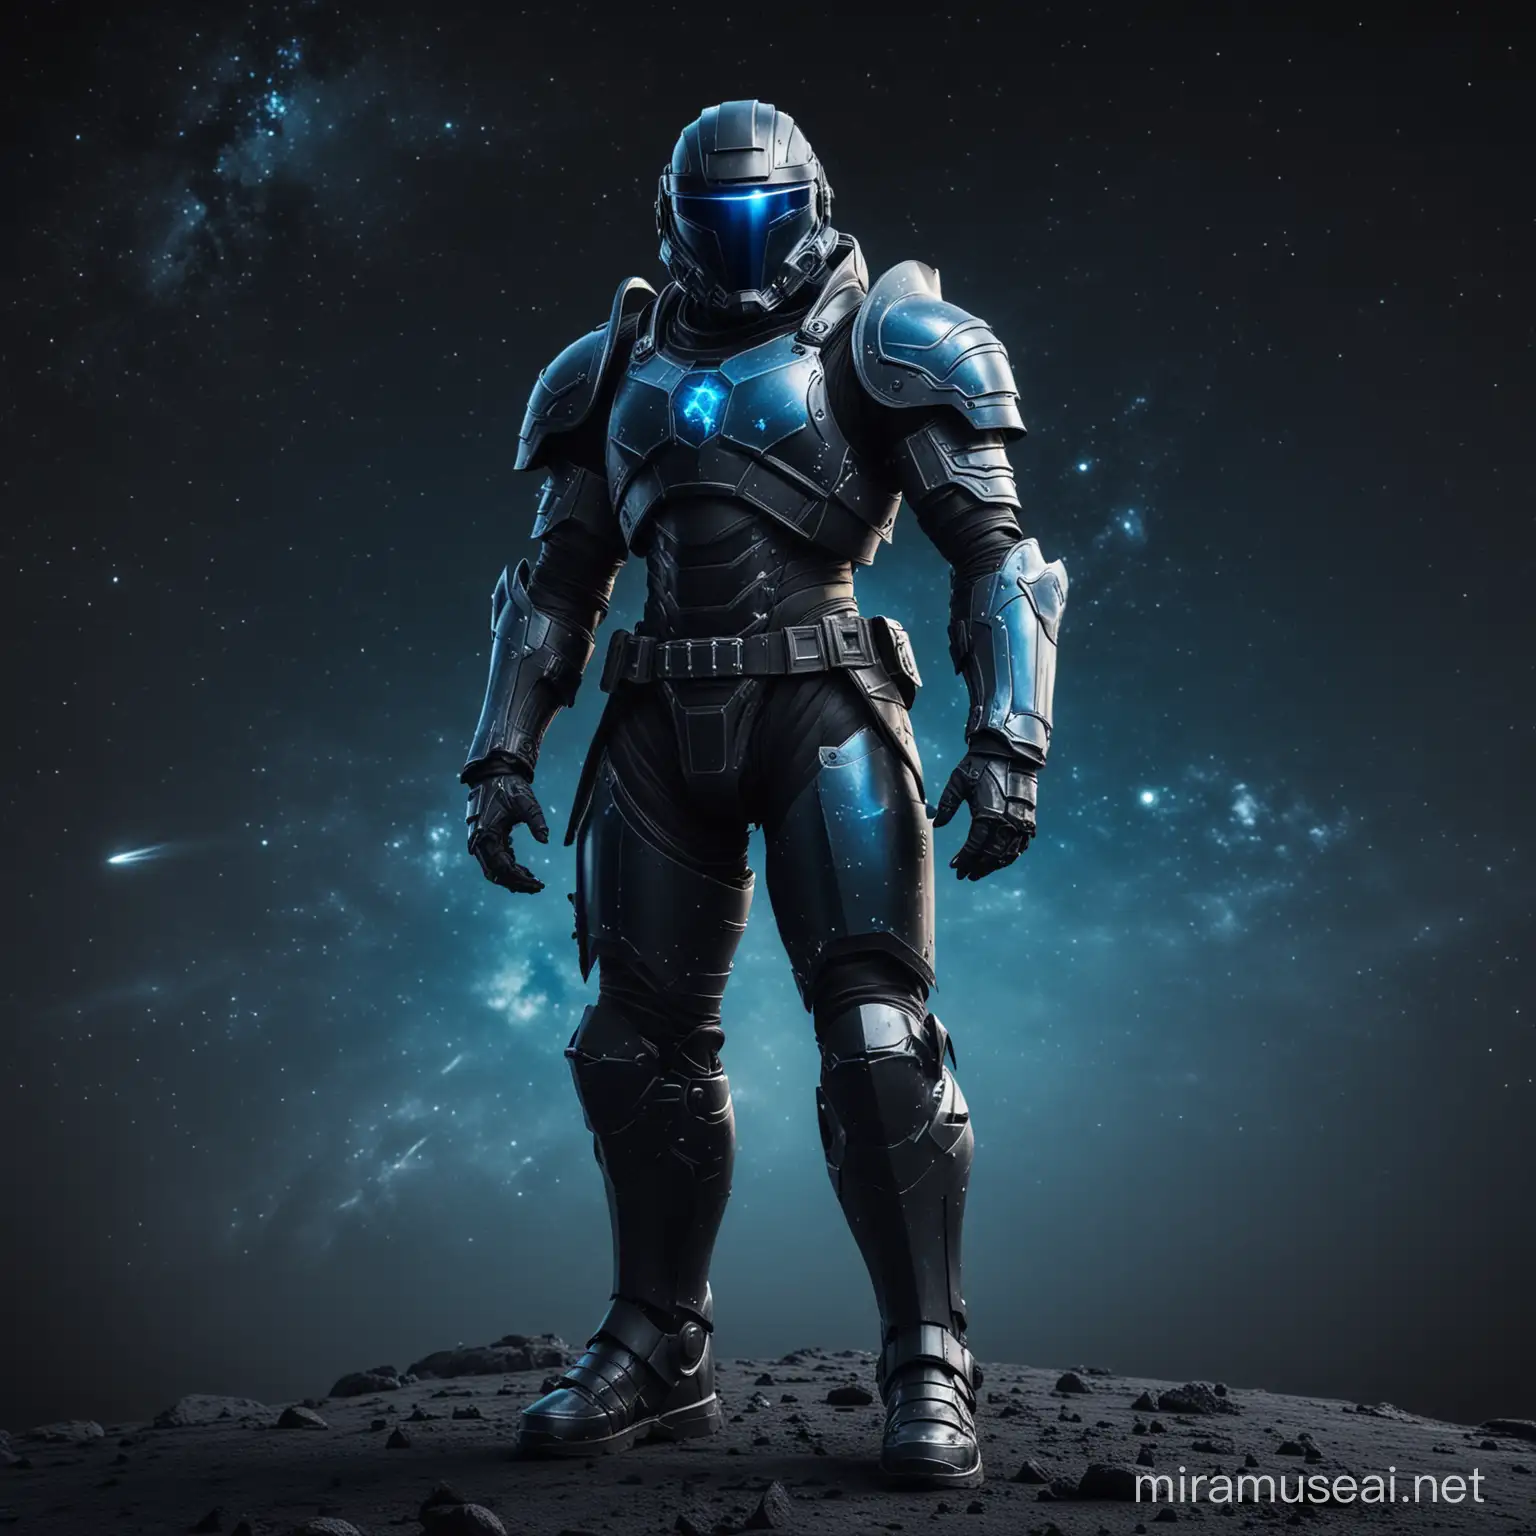 black space soldier knight slim full length smooth armour standing on dark planet space background blue shades